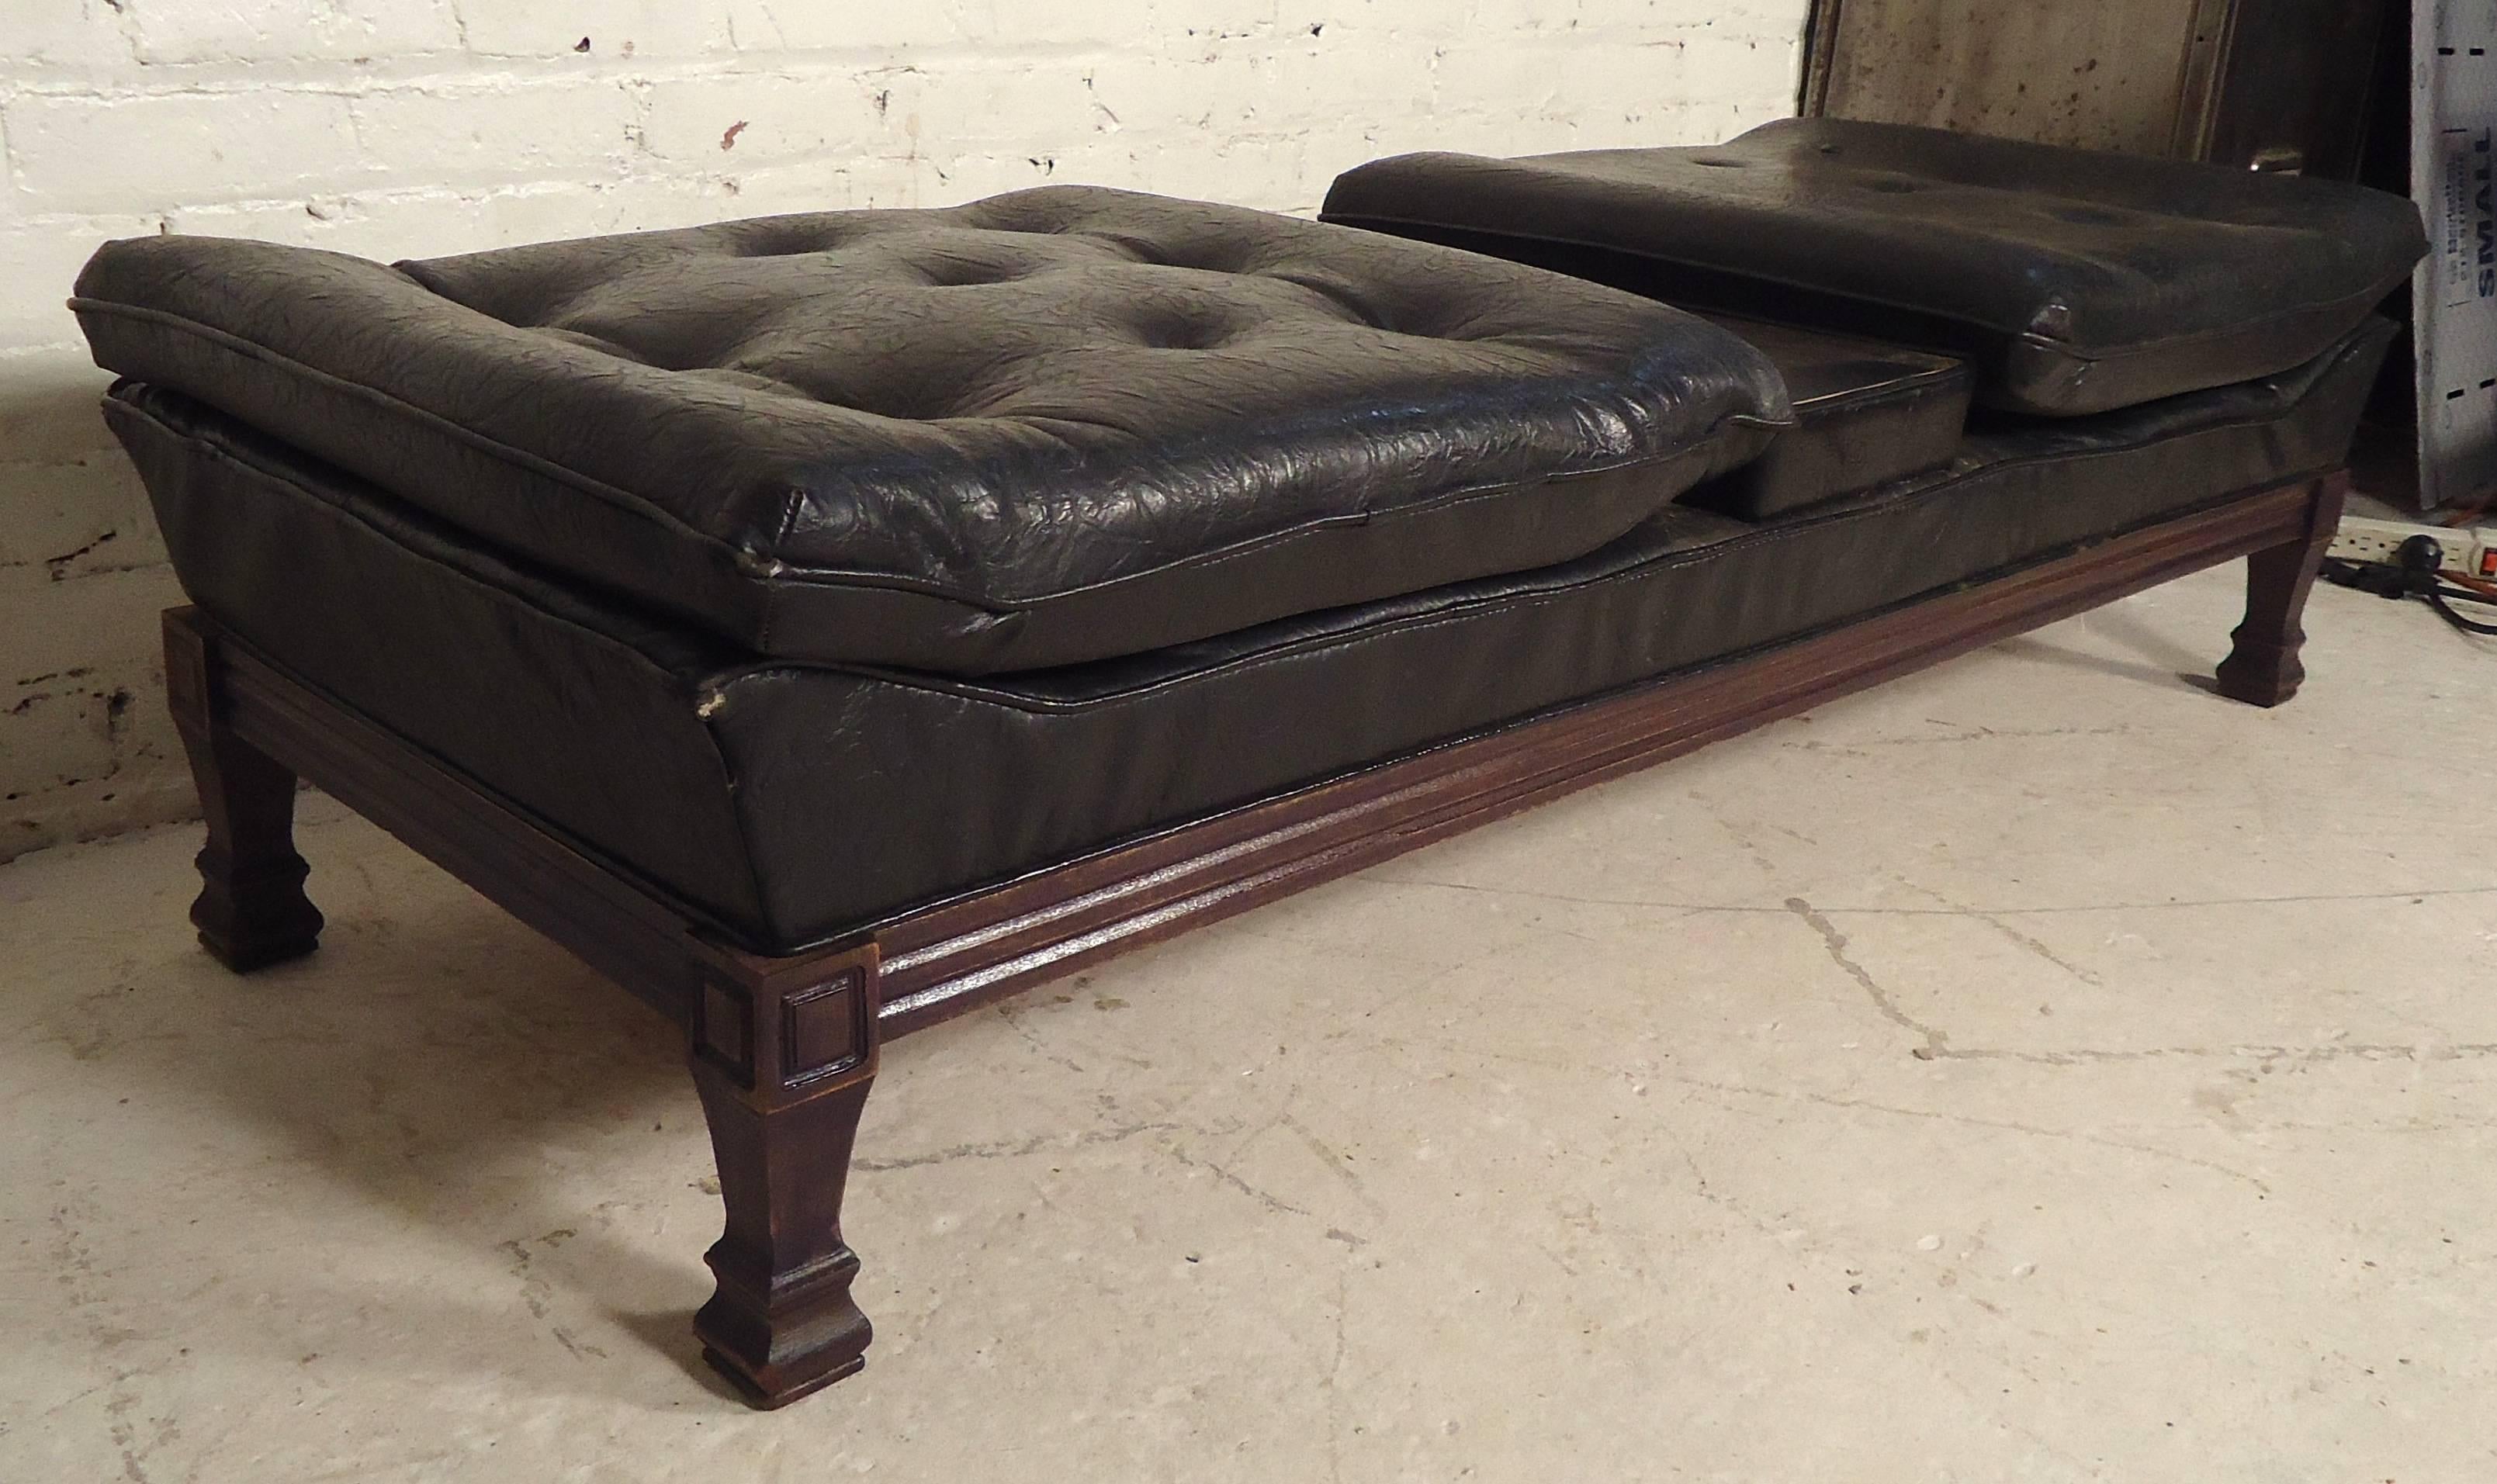 Vintage modern vinyl bench with carved wood frame. Attractive style that can accent modern or antique decor.

(Please confirm item location - NY or NJ - with dealer).
 